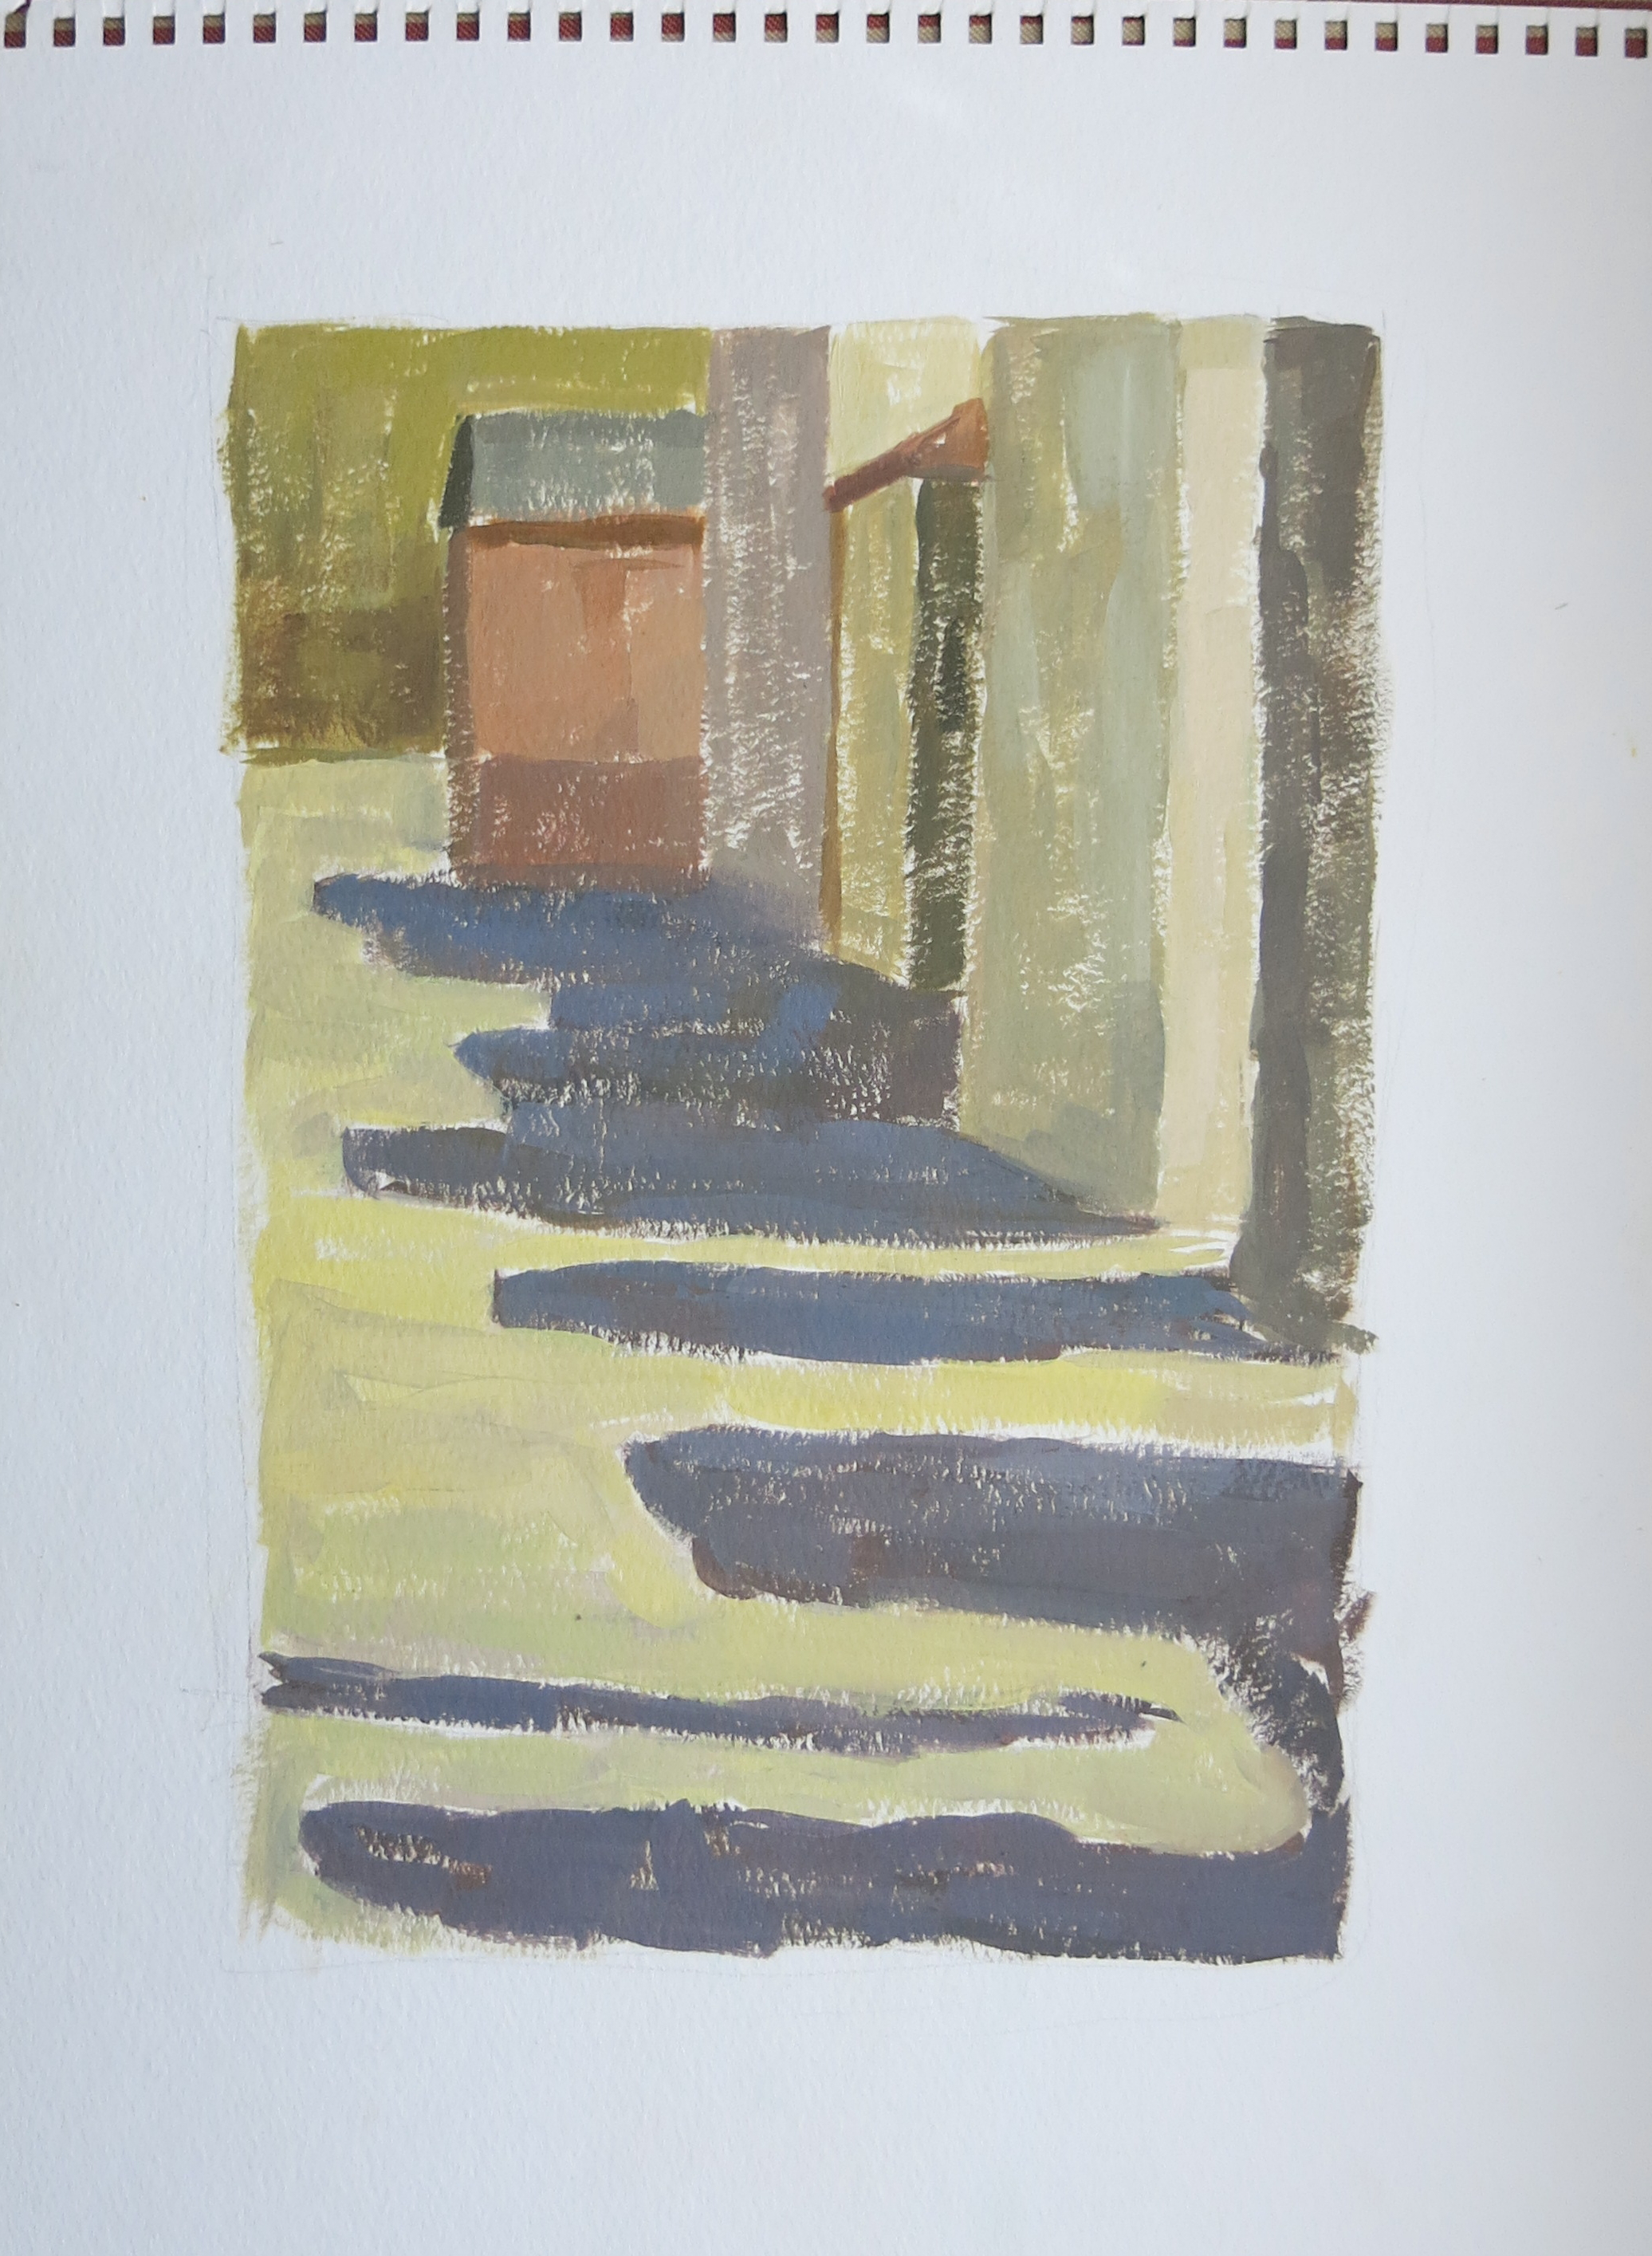 IMG_4999 - venice 2nd time after morandi - 1998-10.5x7.5 - possibly trip top again.png